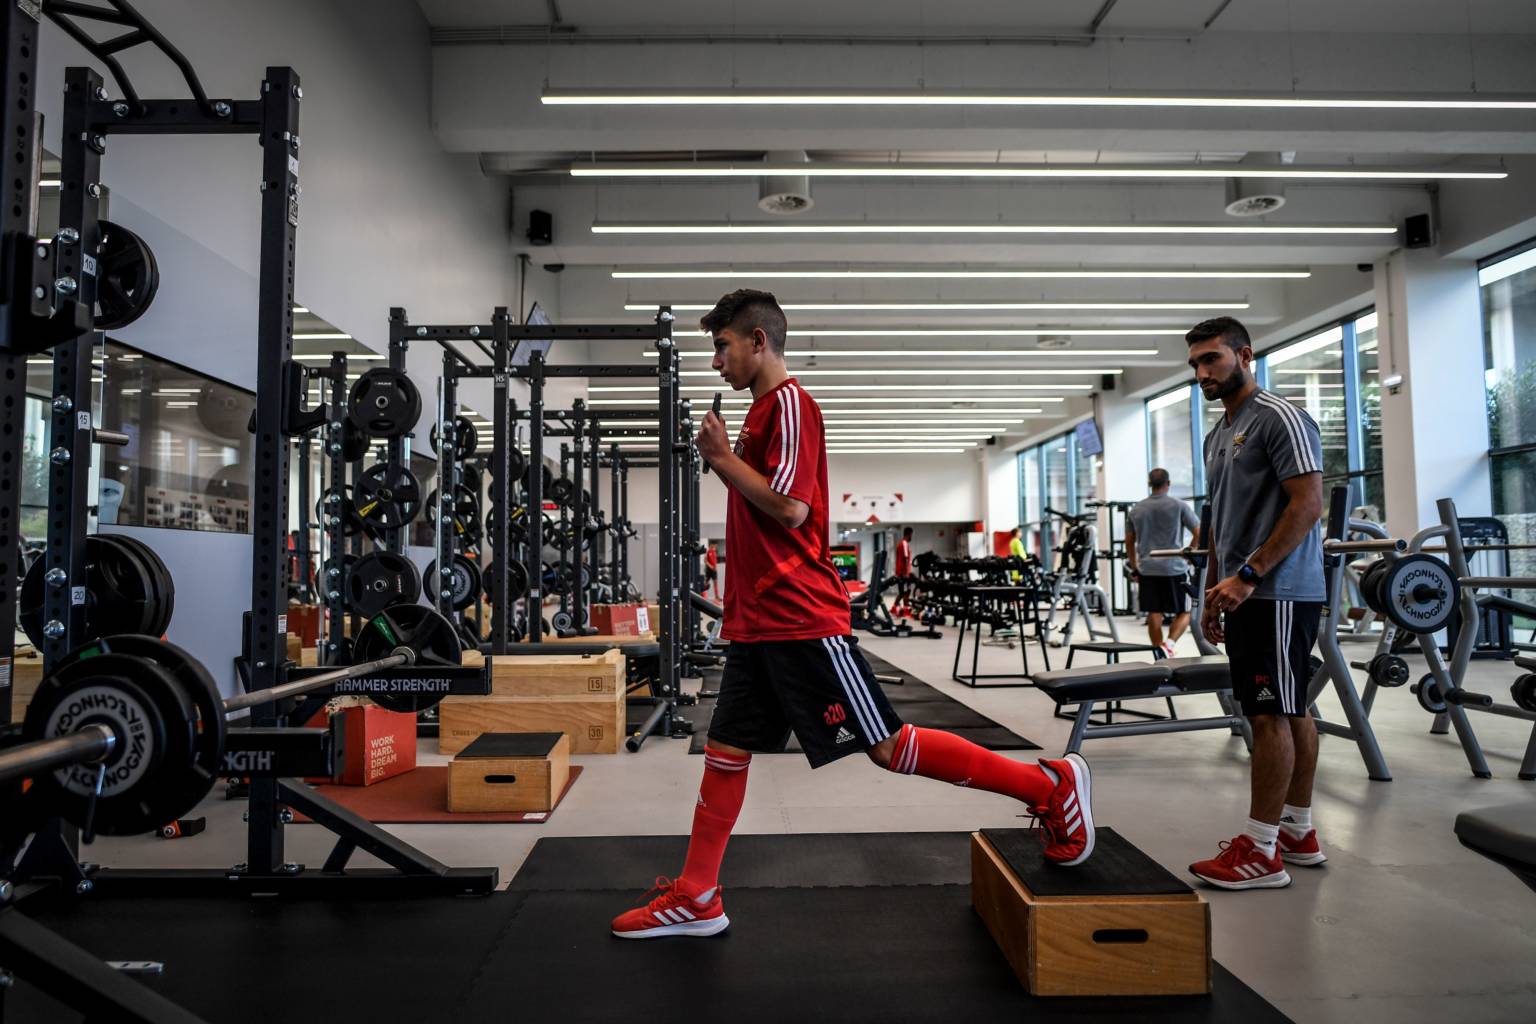 Benfica's under 15 players attend a gym training session at Benfica's Football Academy in Seixal on October 10, 2019. - Bernardo Silva, Joao Cancelo, Goncalo Guedes or more recently Joao Felix: all these players come from the excellent training center Benfica Lisbon, a machine to produce football stars. (Photo by PATRICIA DE MELO MOREIRA / AFP) (Photo by PATRICIA DE MELO MOREIRA/AFP via Getty Images)